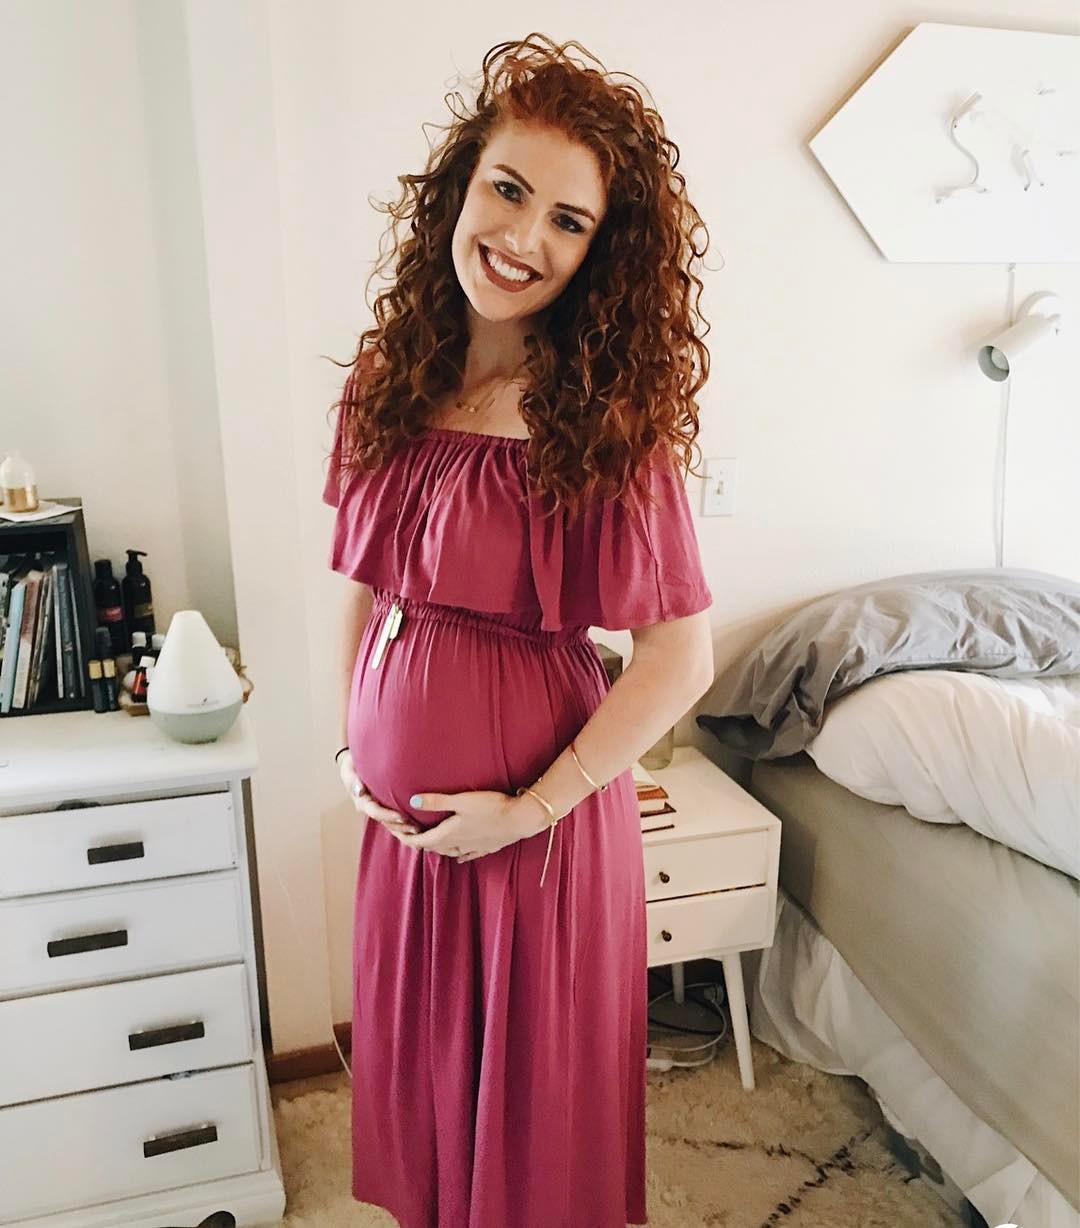 Who Is Audrey Roloff? Meet the Former 'Little People, Big World' Star